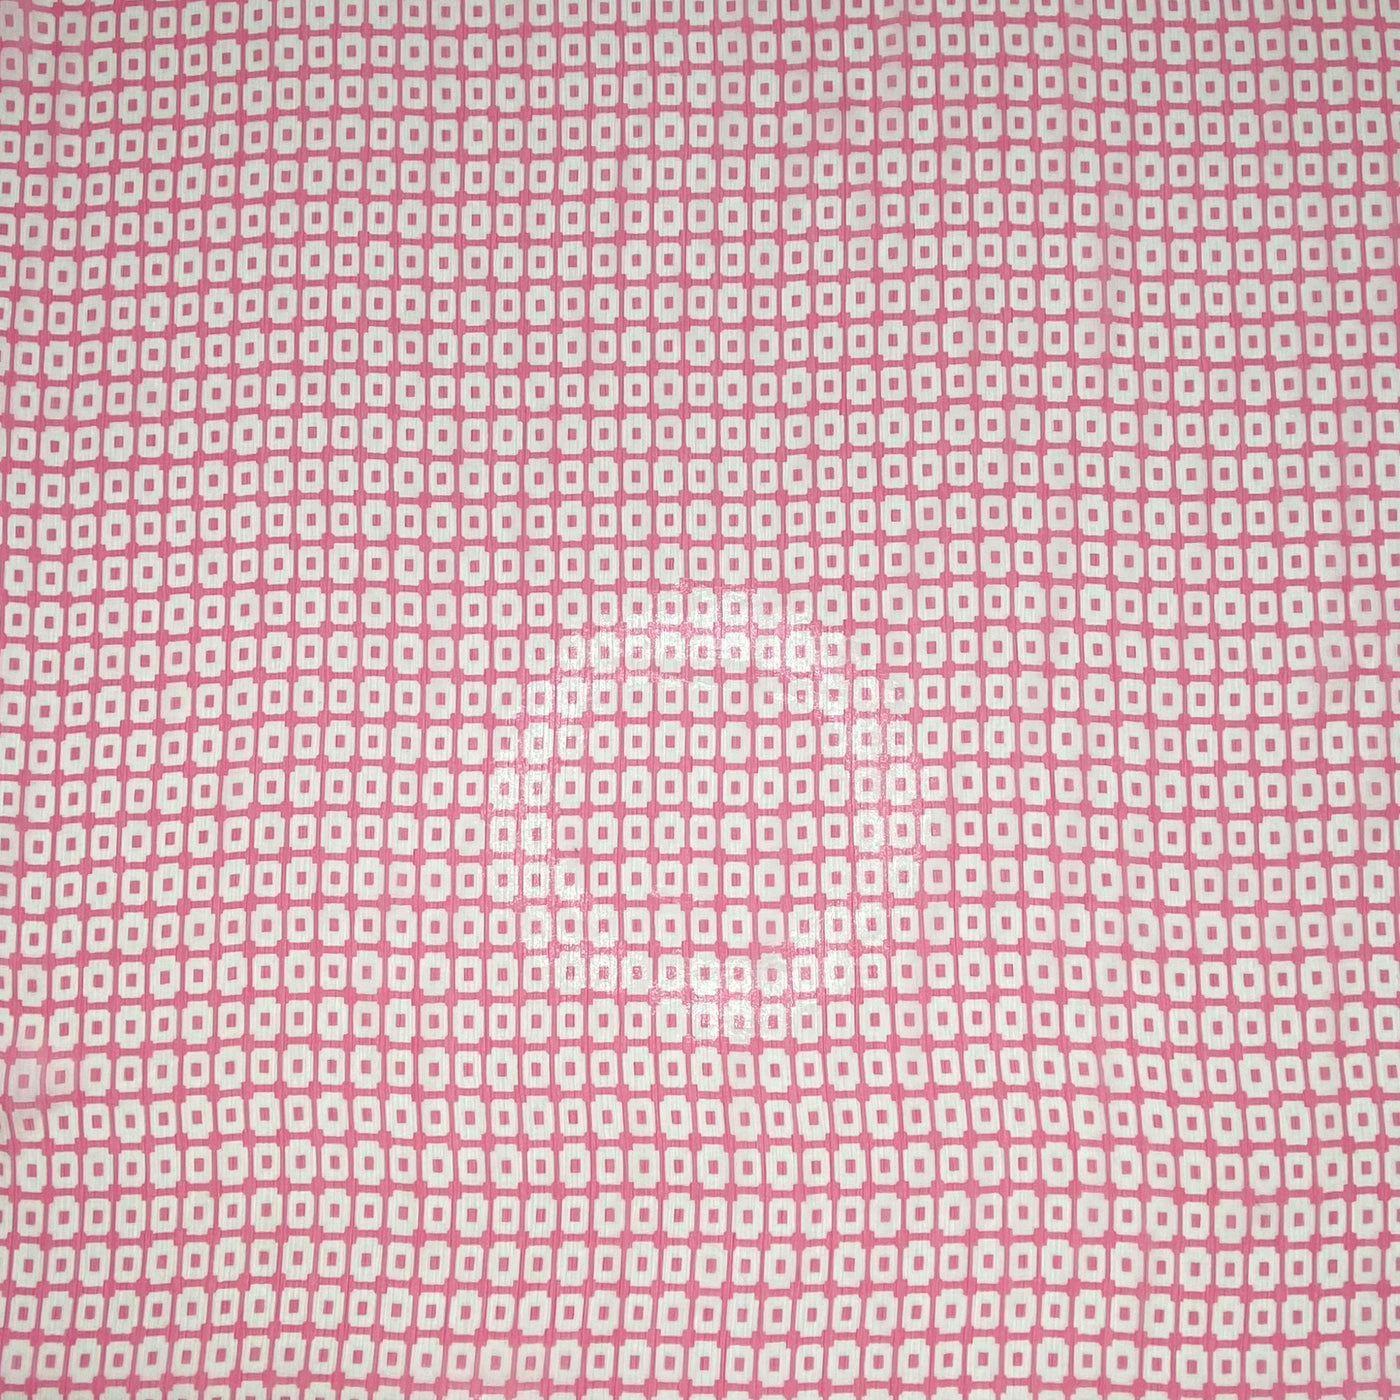 Crinkled Printed Polyester Chiffon - Pink/White